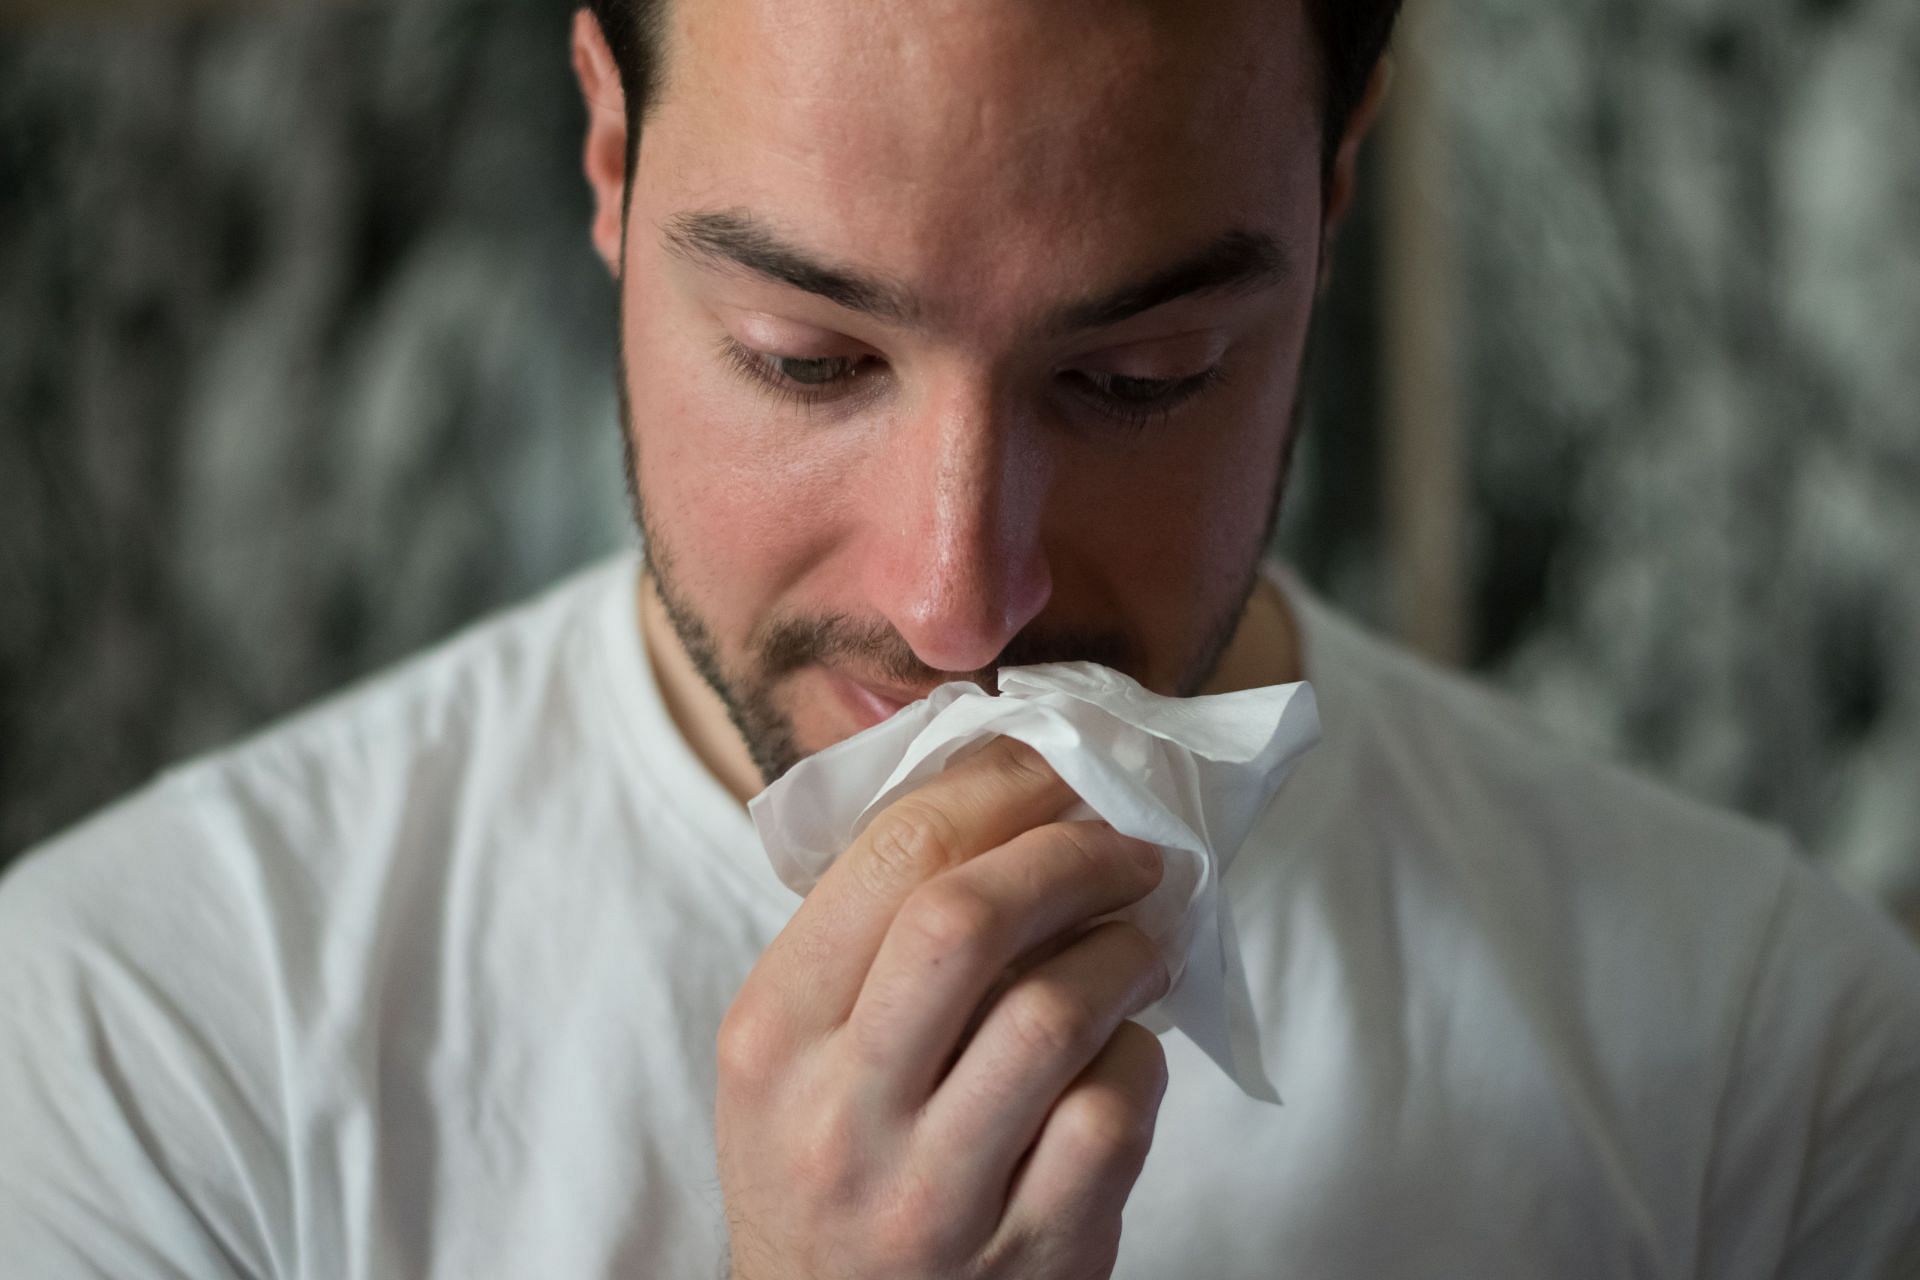 Here are the best foods to eat when sick. (image via unsplash/Brittany Colette)